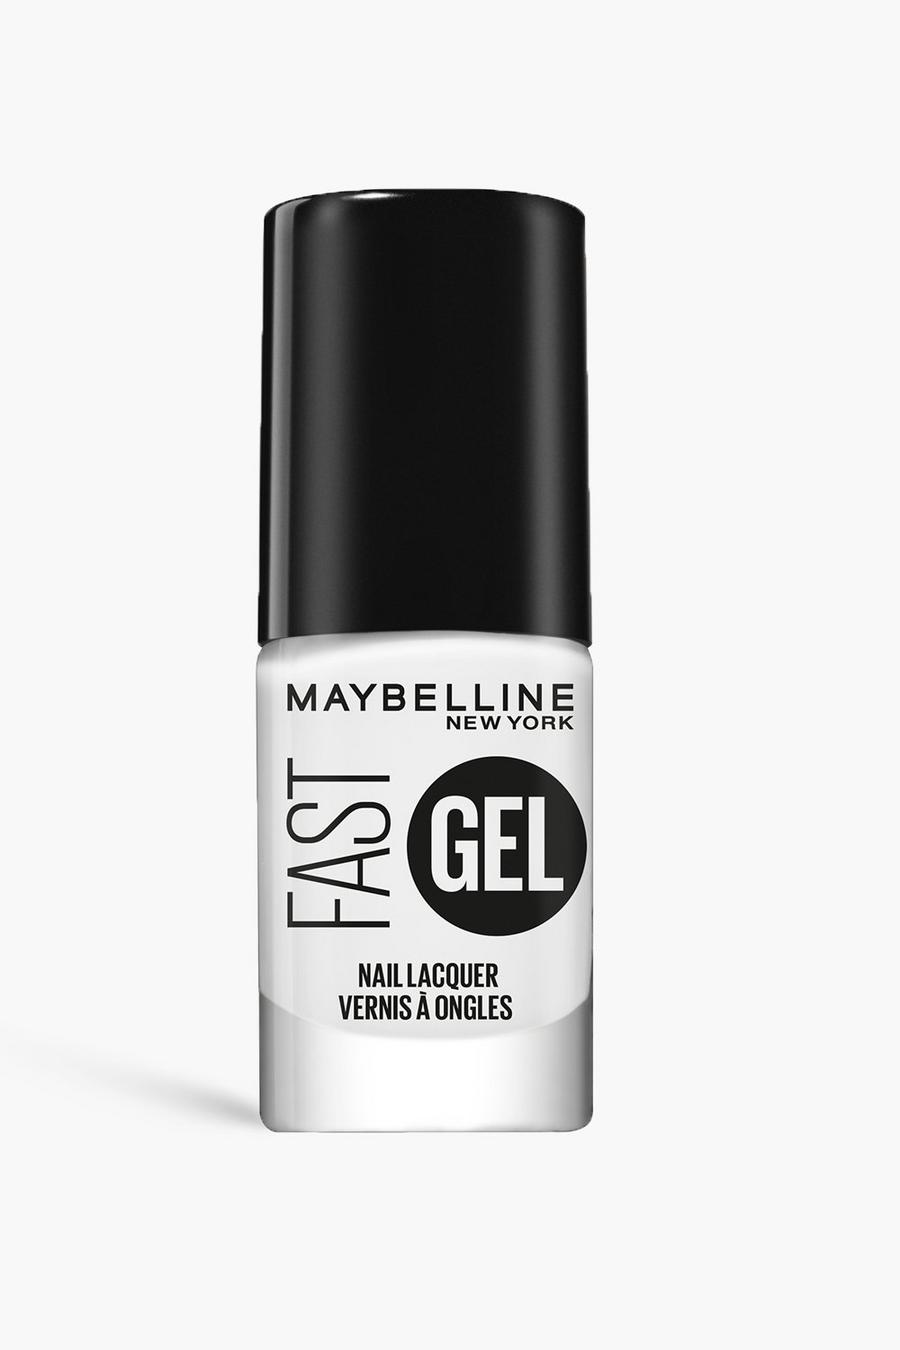 Maybelline Fast Gel Nail Lacquer Top Coat Long-Lasting, High-Shine Nail ...